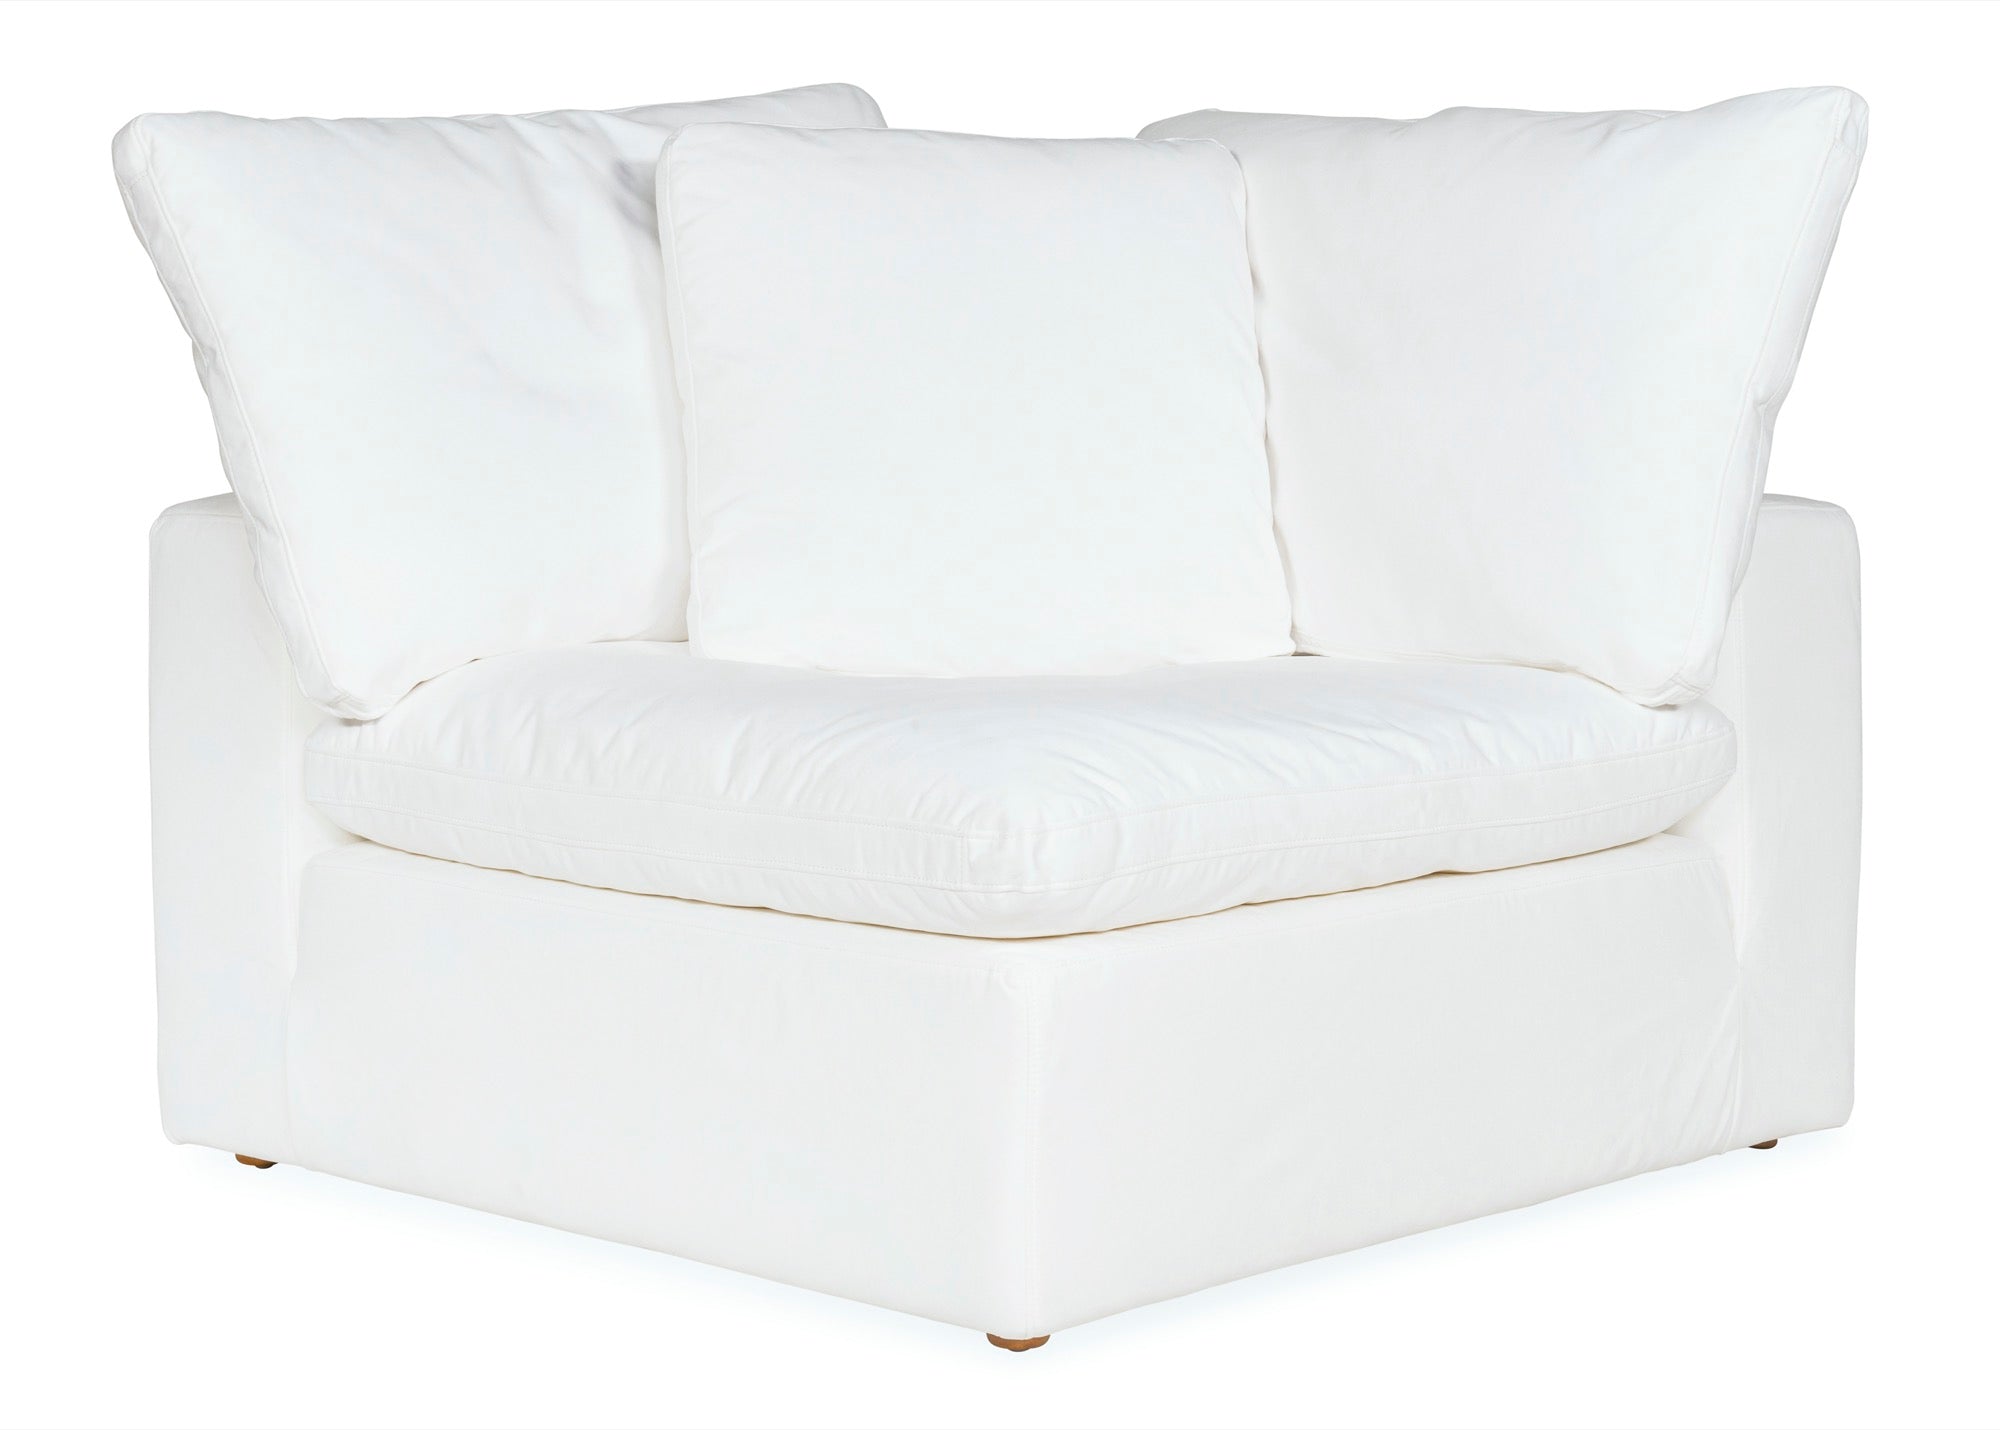 Movie Night™ Corner Chair, Standard, Brie (Left or Right) - Image 5